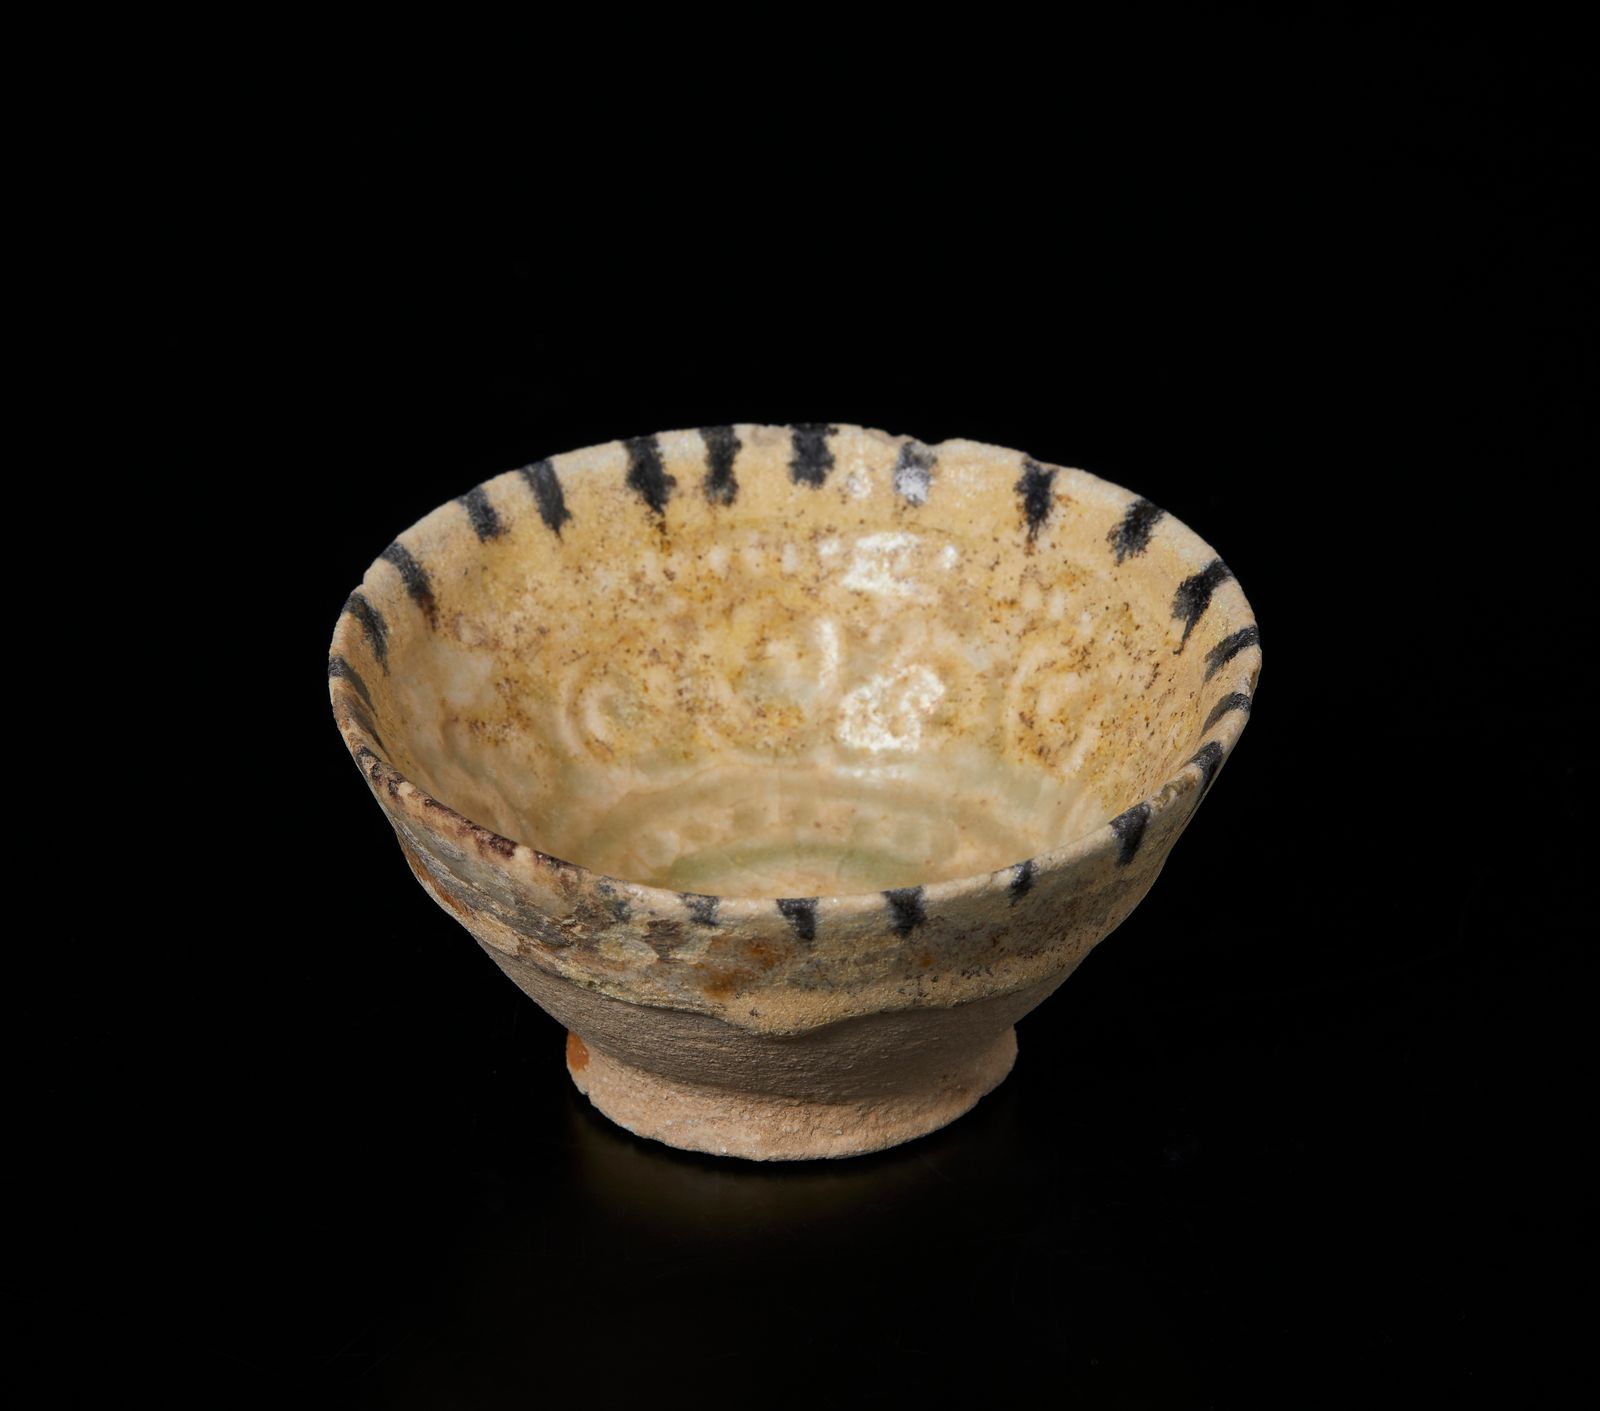 Islamic Art A small pottery bowl with moulded decoration Arte islamica. Piccola &hellip;